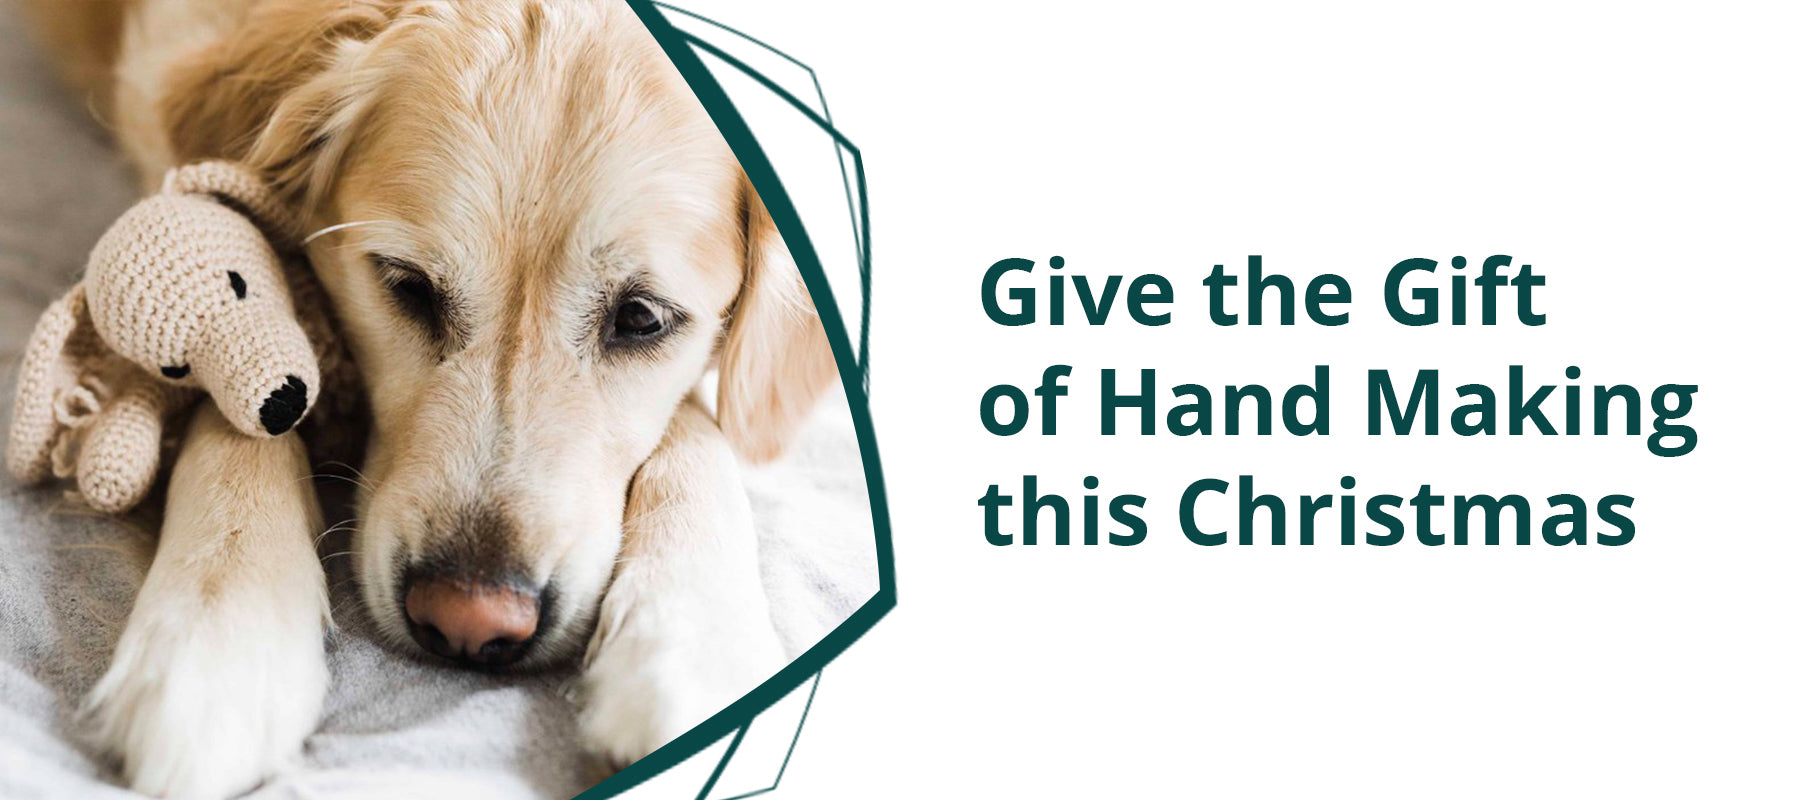 Give the gift of hand making this Christmas